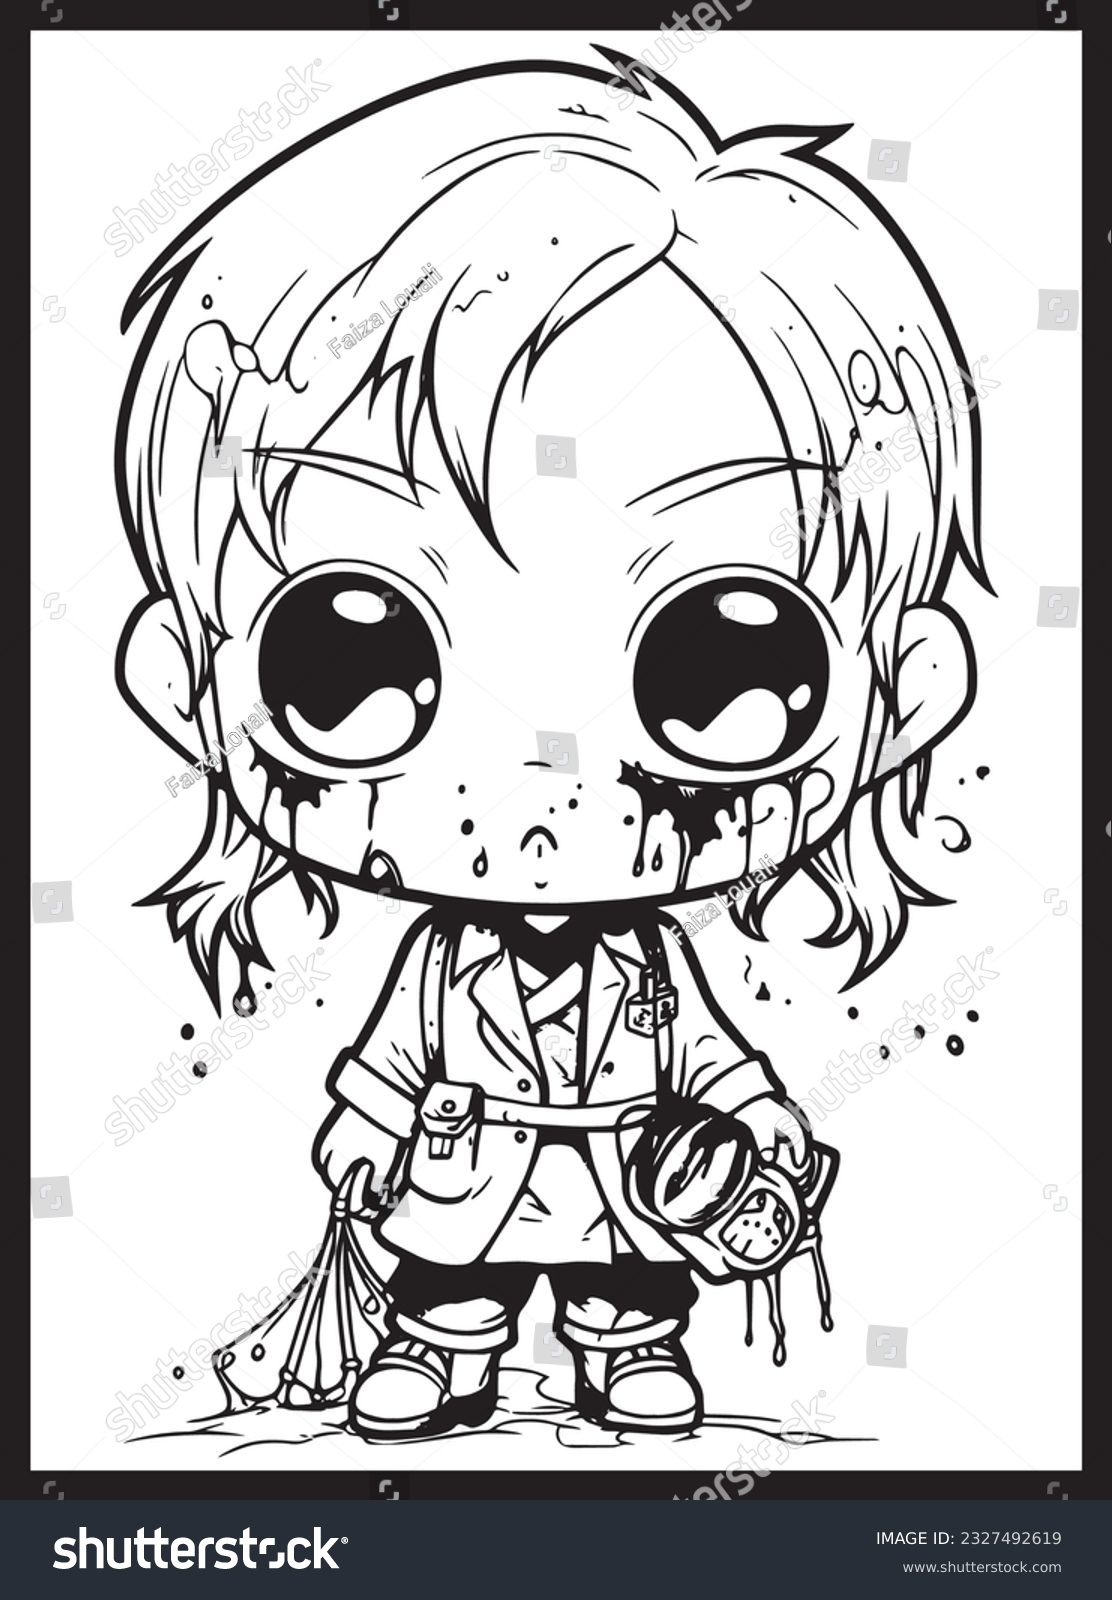 Cute horror chibi coloring pages stock vector royalty free